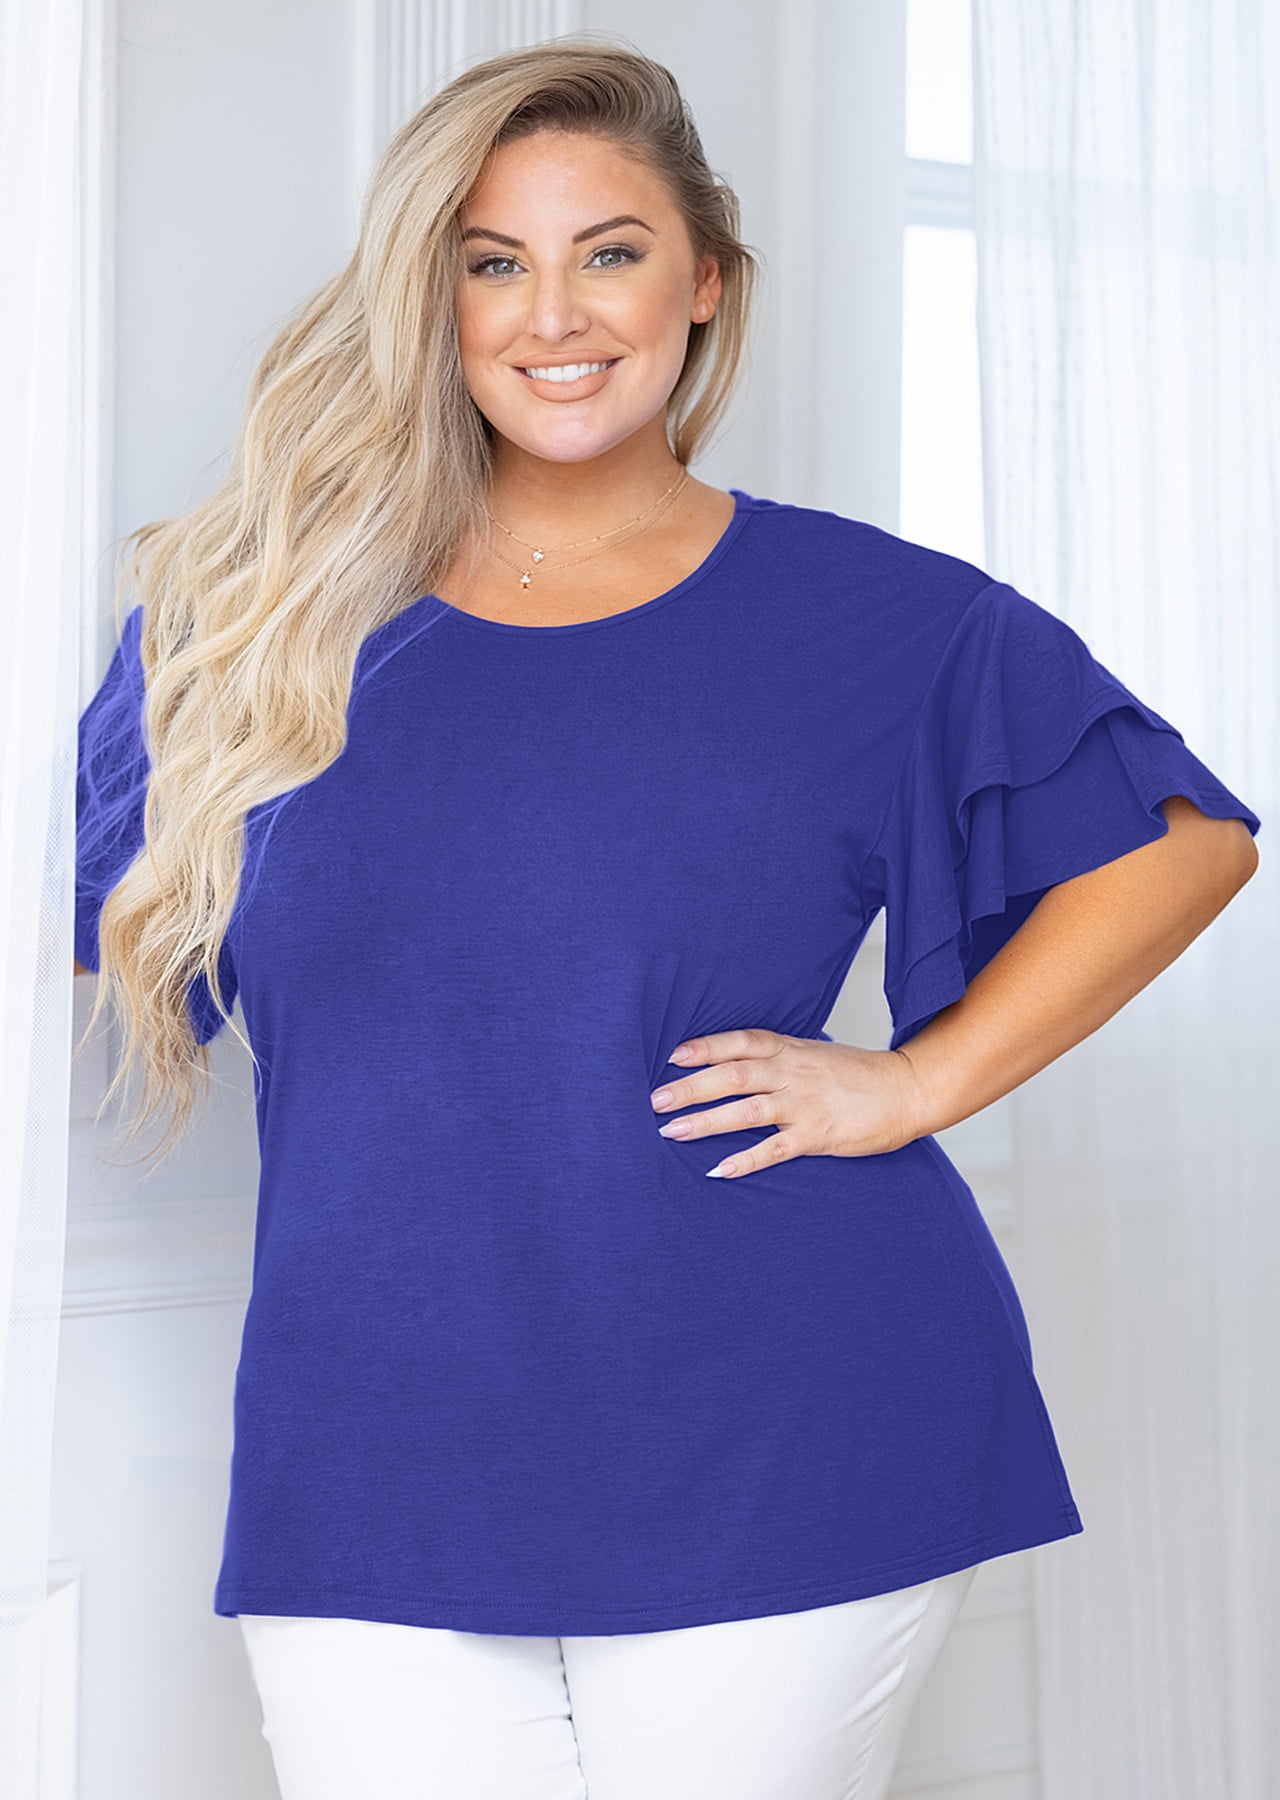 SHOWMALL Plus Size Clothes for Women Short Sleeve Blue 5X Tunic